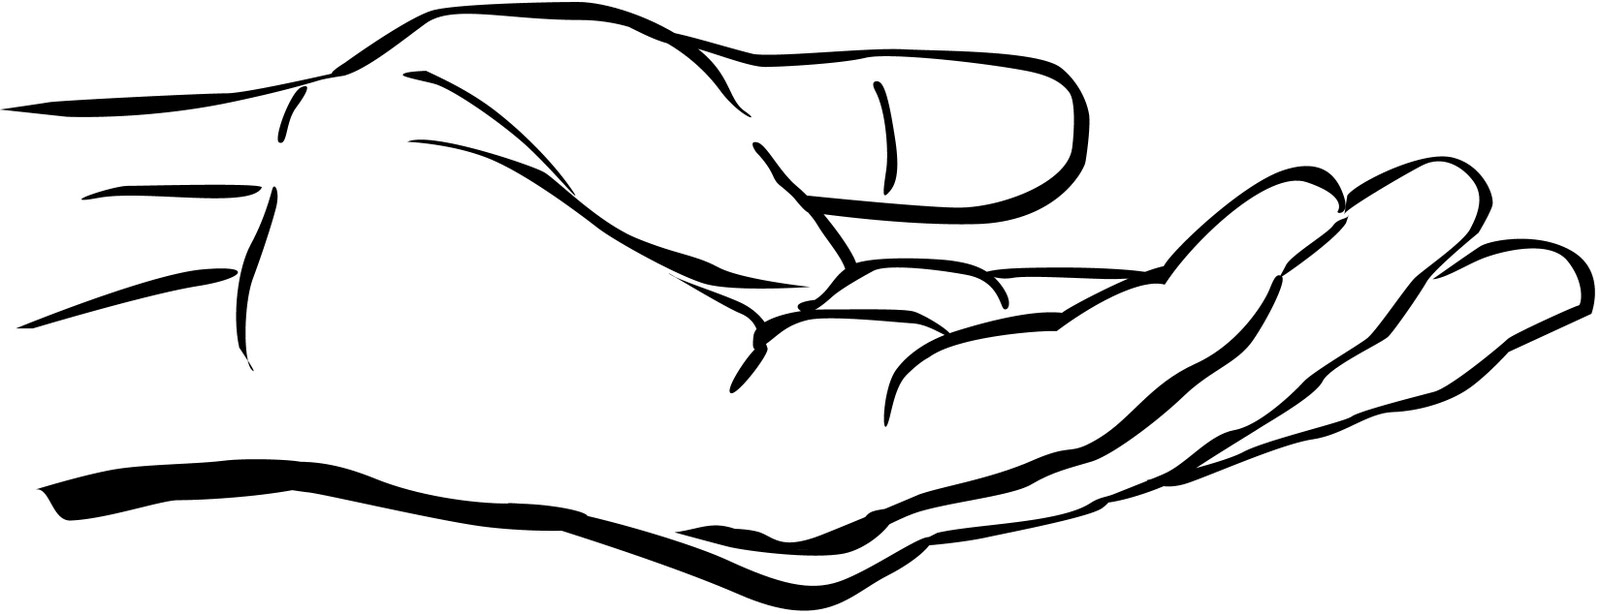 Hands Clipart Black And White - Free Clipart Images